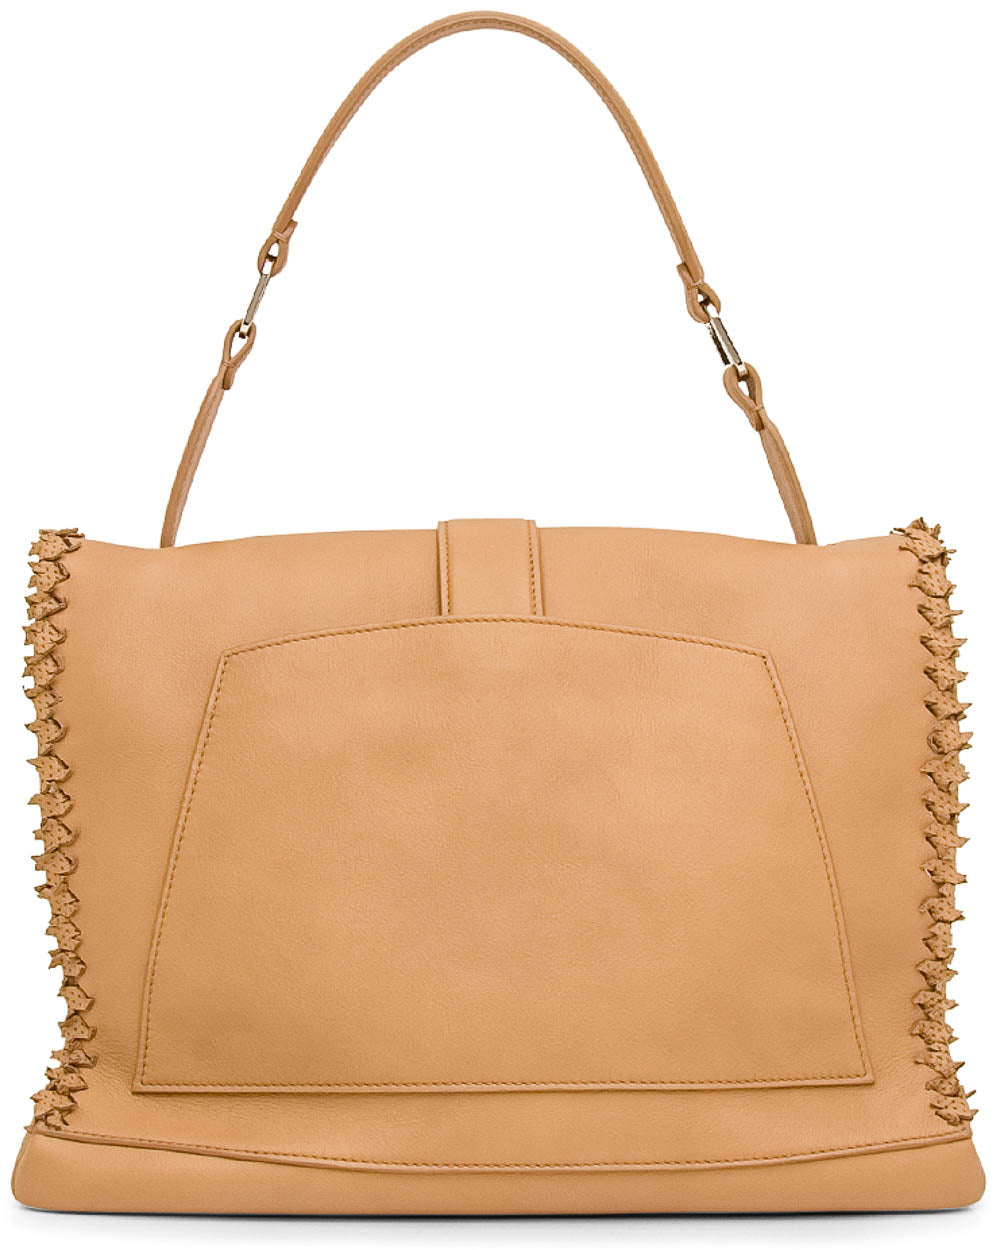 Large Top Handle Bag in Camel